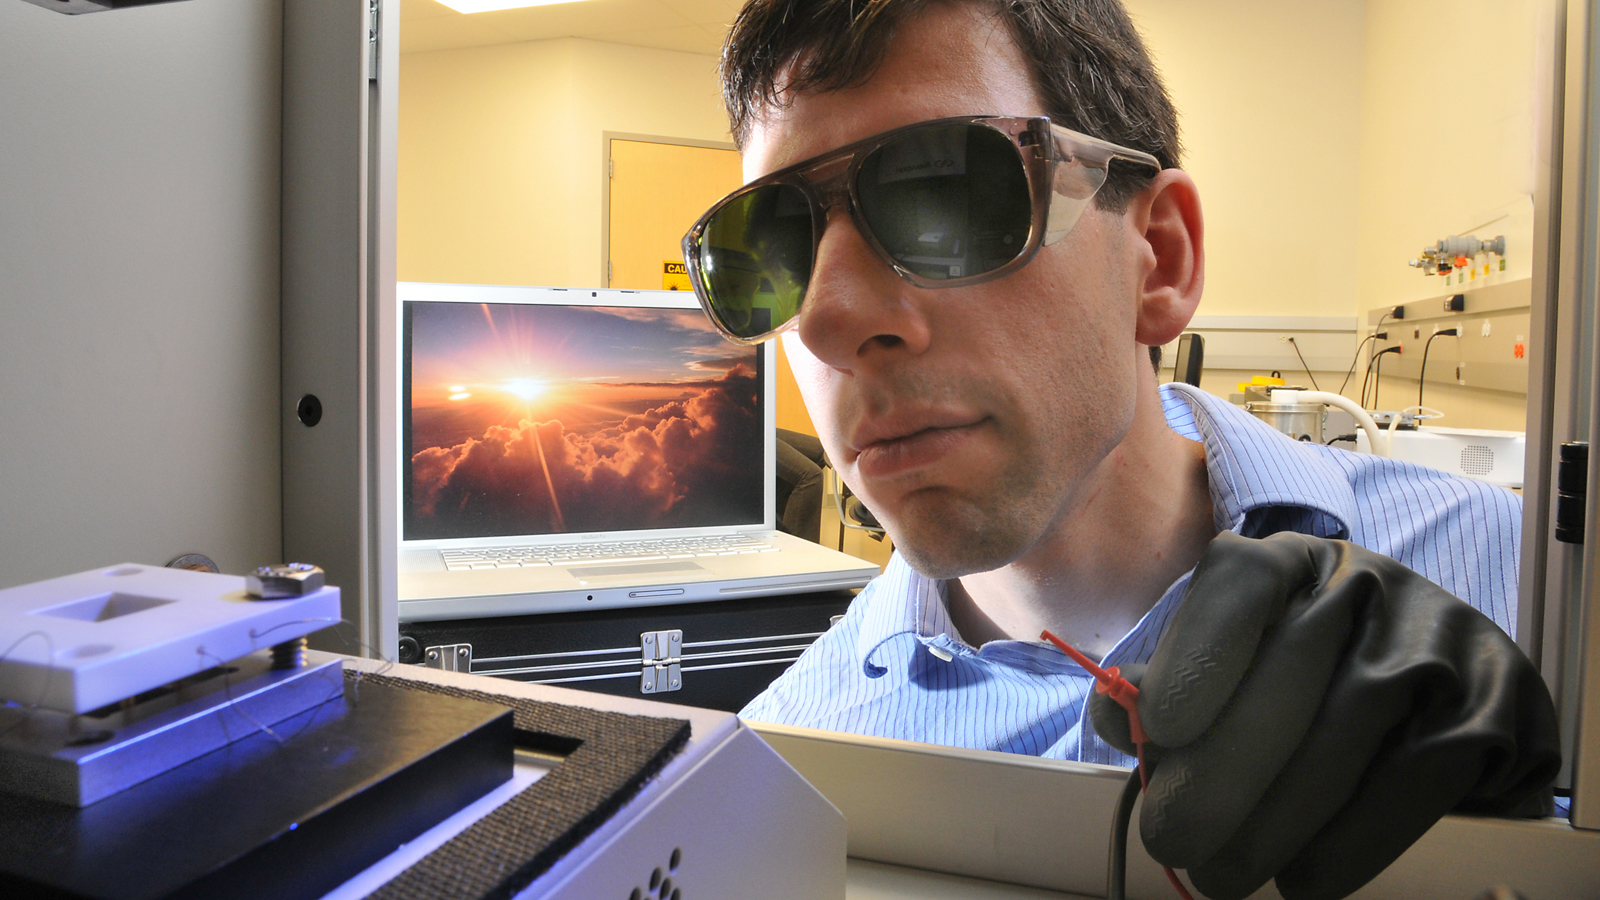 Argonne nanoscientist Seth Darling measures the performance of a nanostructured organic photovoltaic cell using a solar simulator that replicates sunlight under standardized conditions.